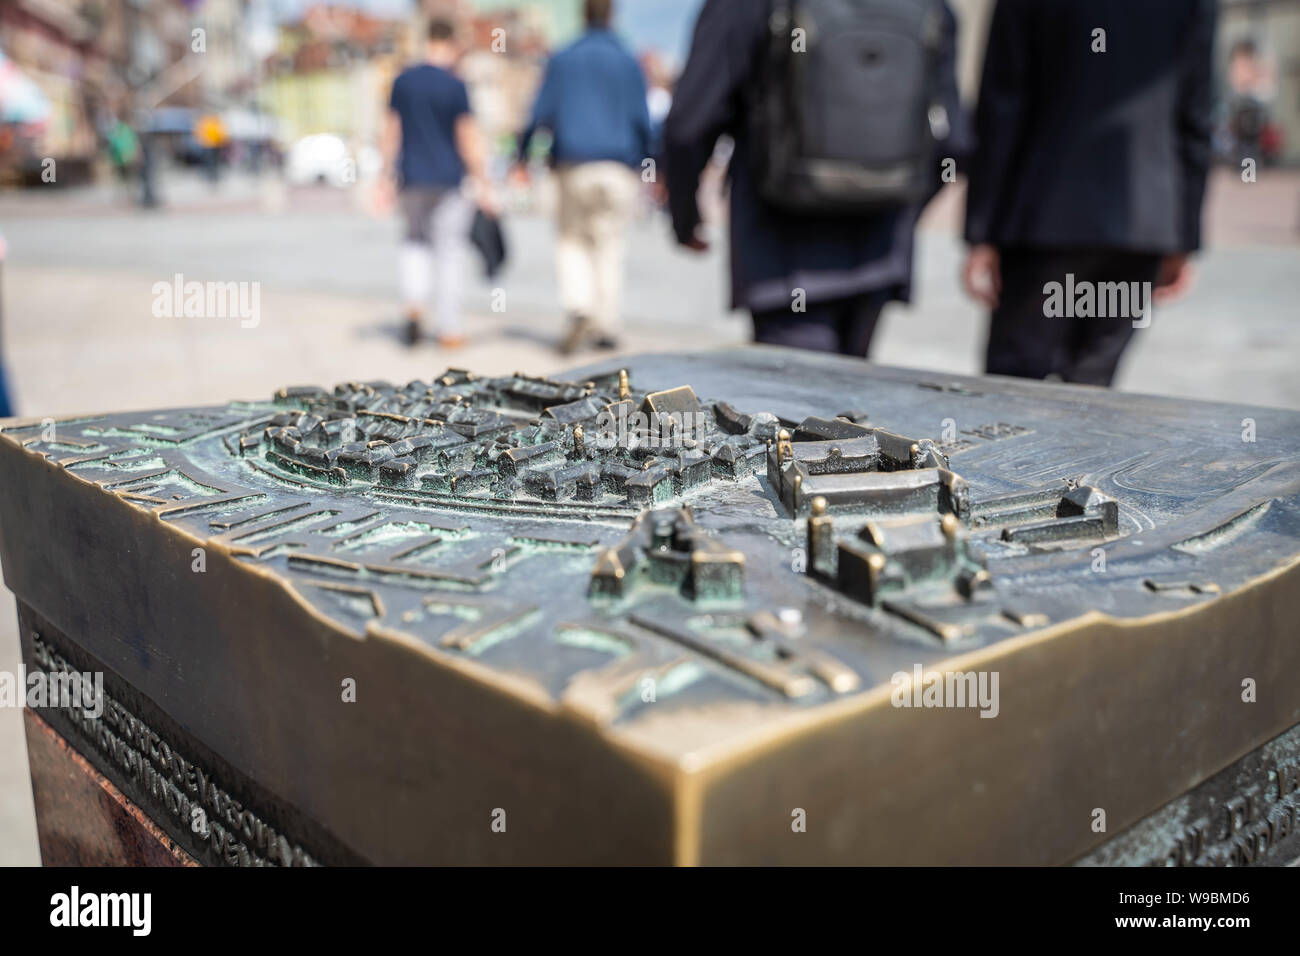 Warsaw, Poland - August 2019: Scaled tactile map of Warsaw Old Town for visually impaired people. Blurred background. Stock Photo